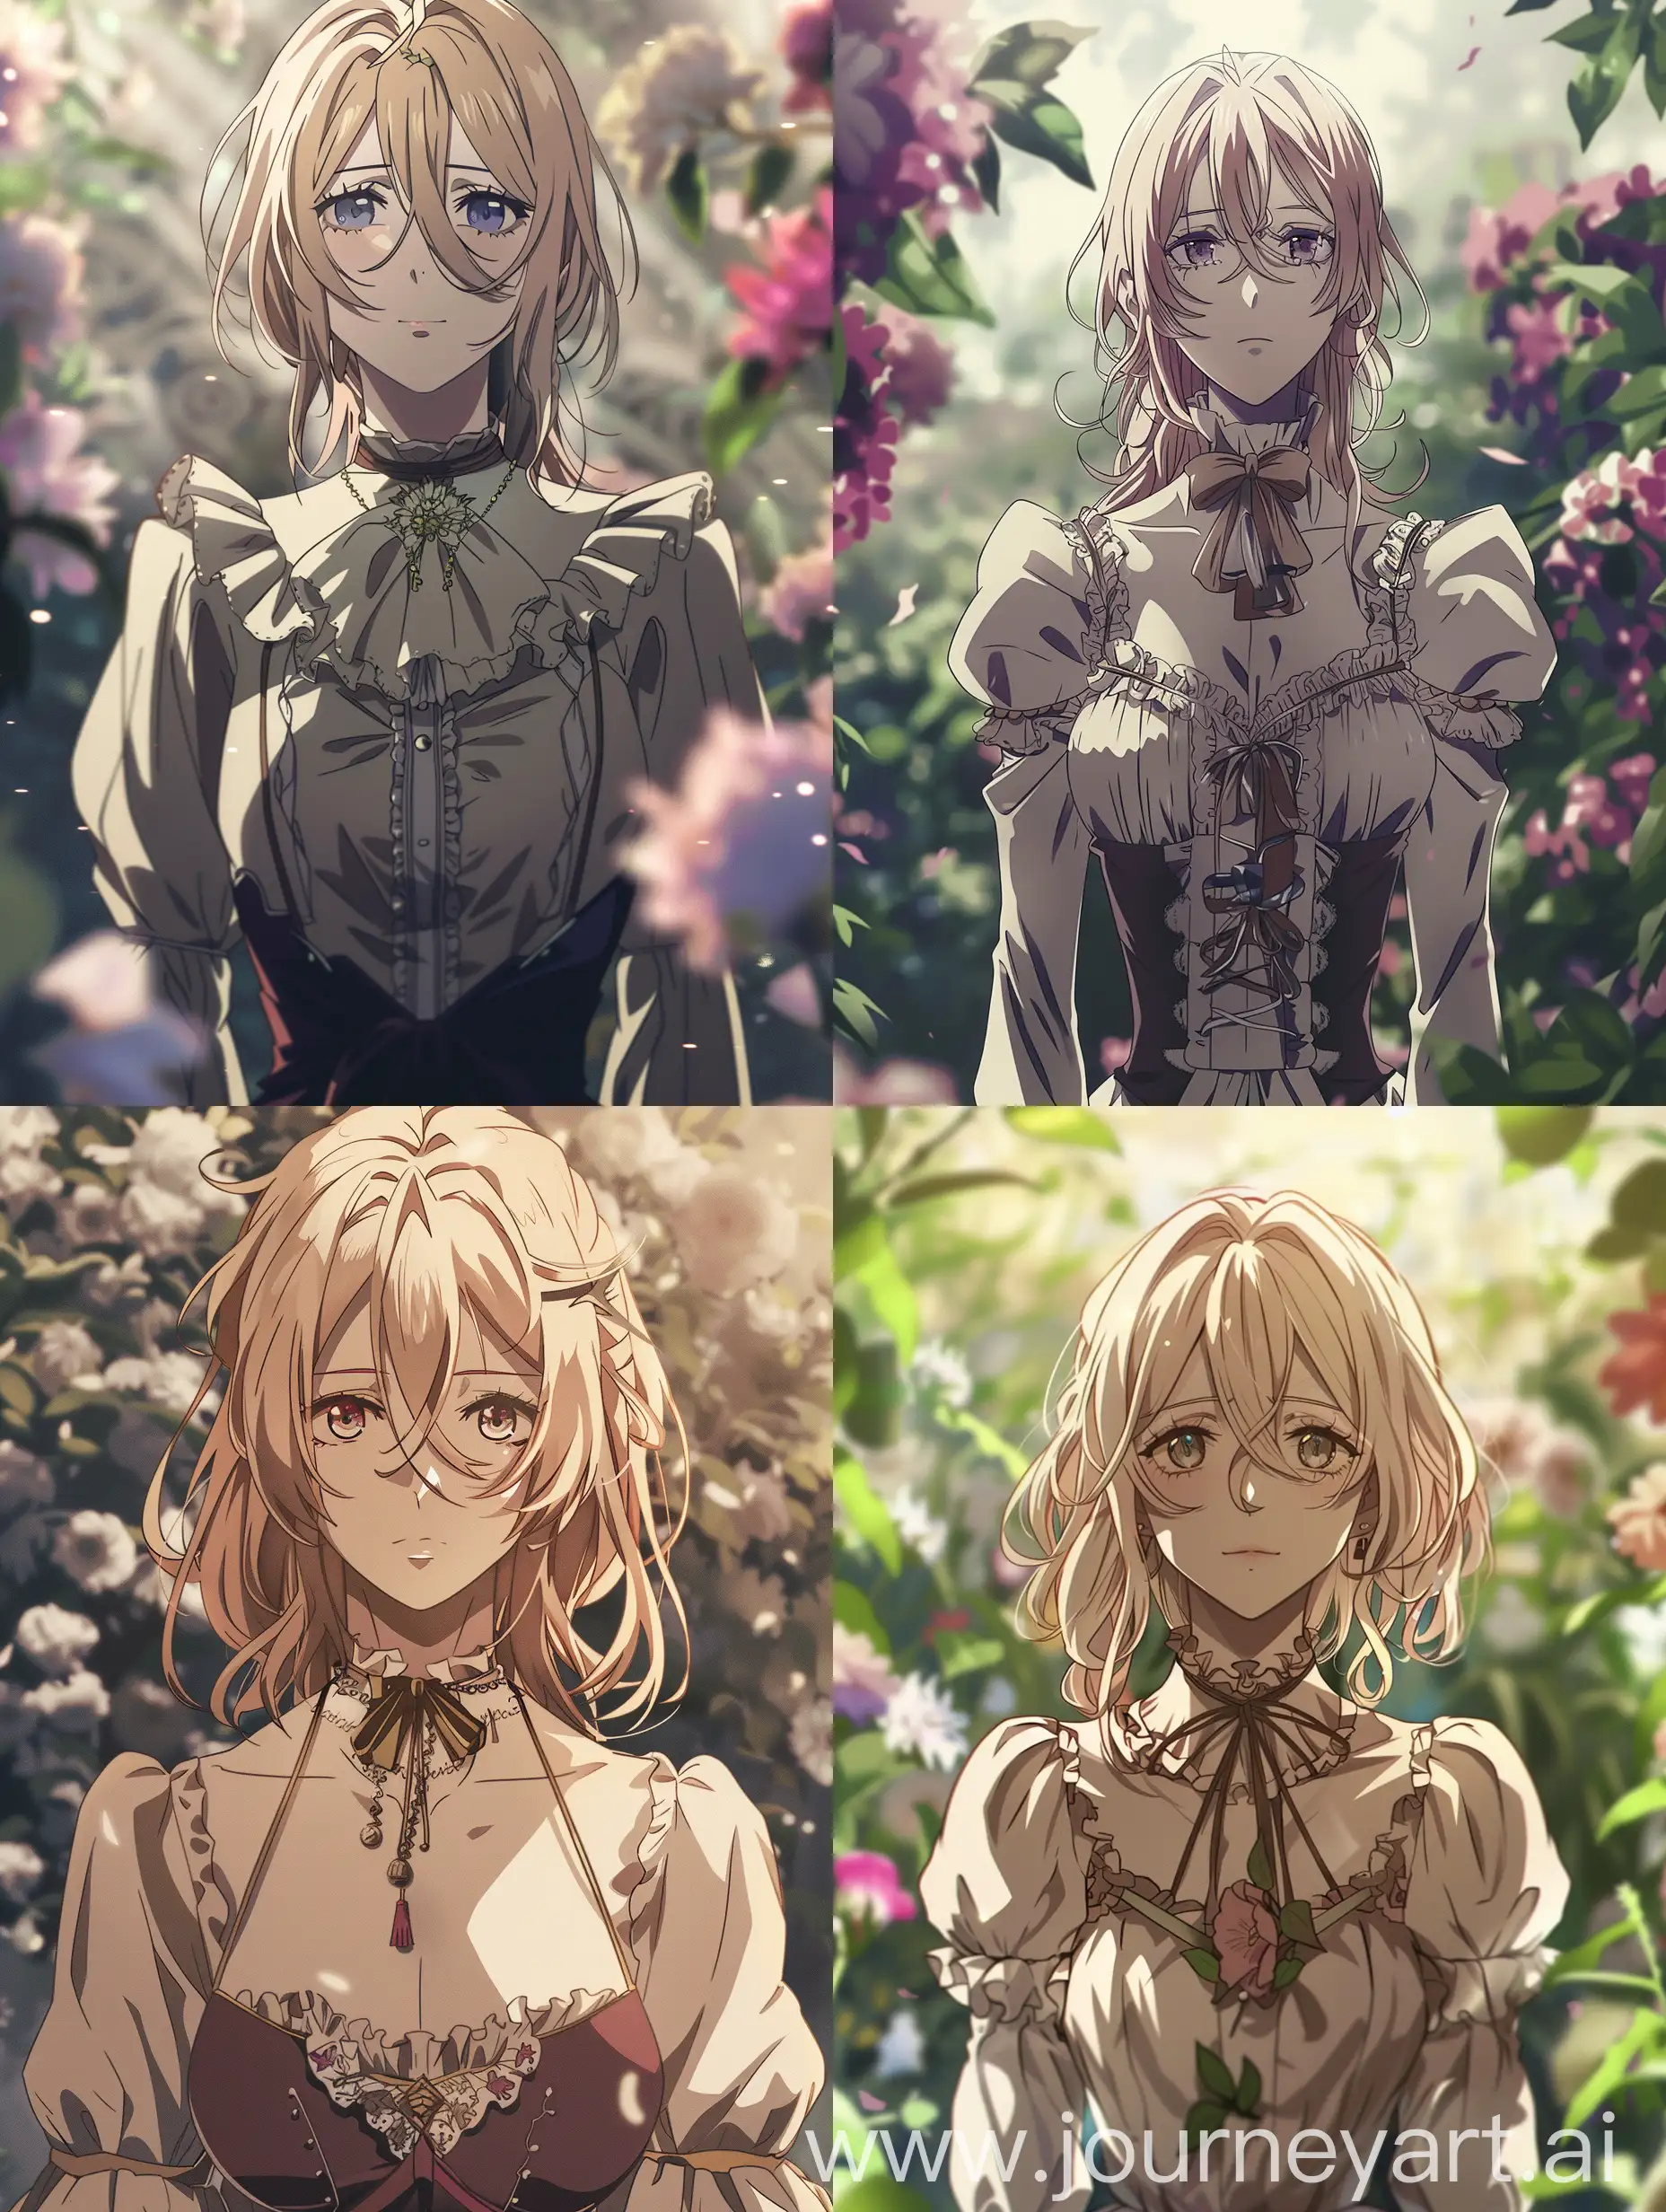 Violet Evergarden, with a soft anime style, her face and the upper half of her body.